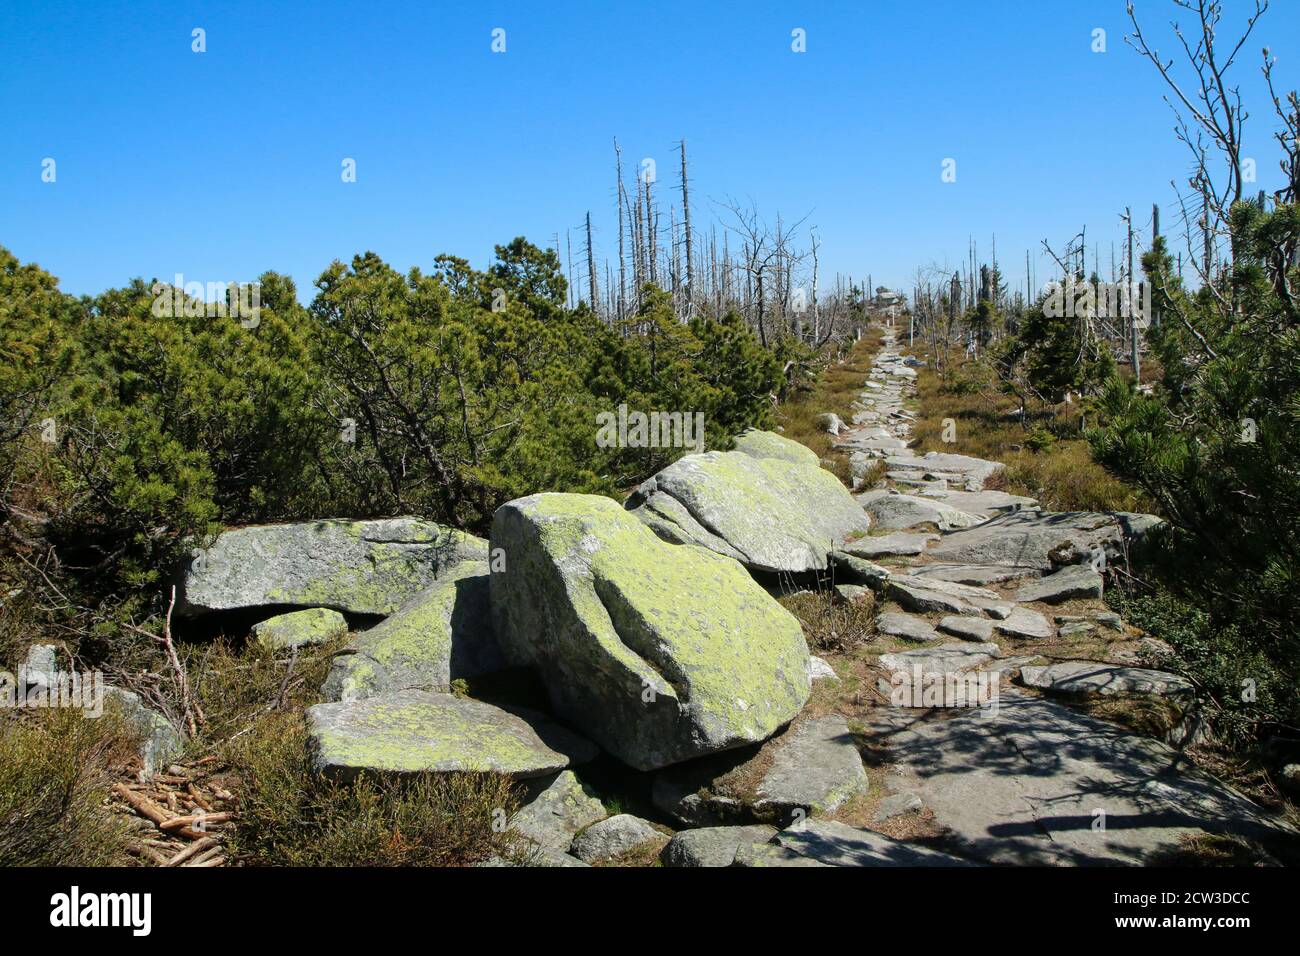 The hiking trail made of stones at Šumava national park in Czech Republic. The forest is damaged by the hurricane and left to revitalize naturally. Stock Photo